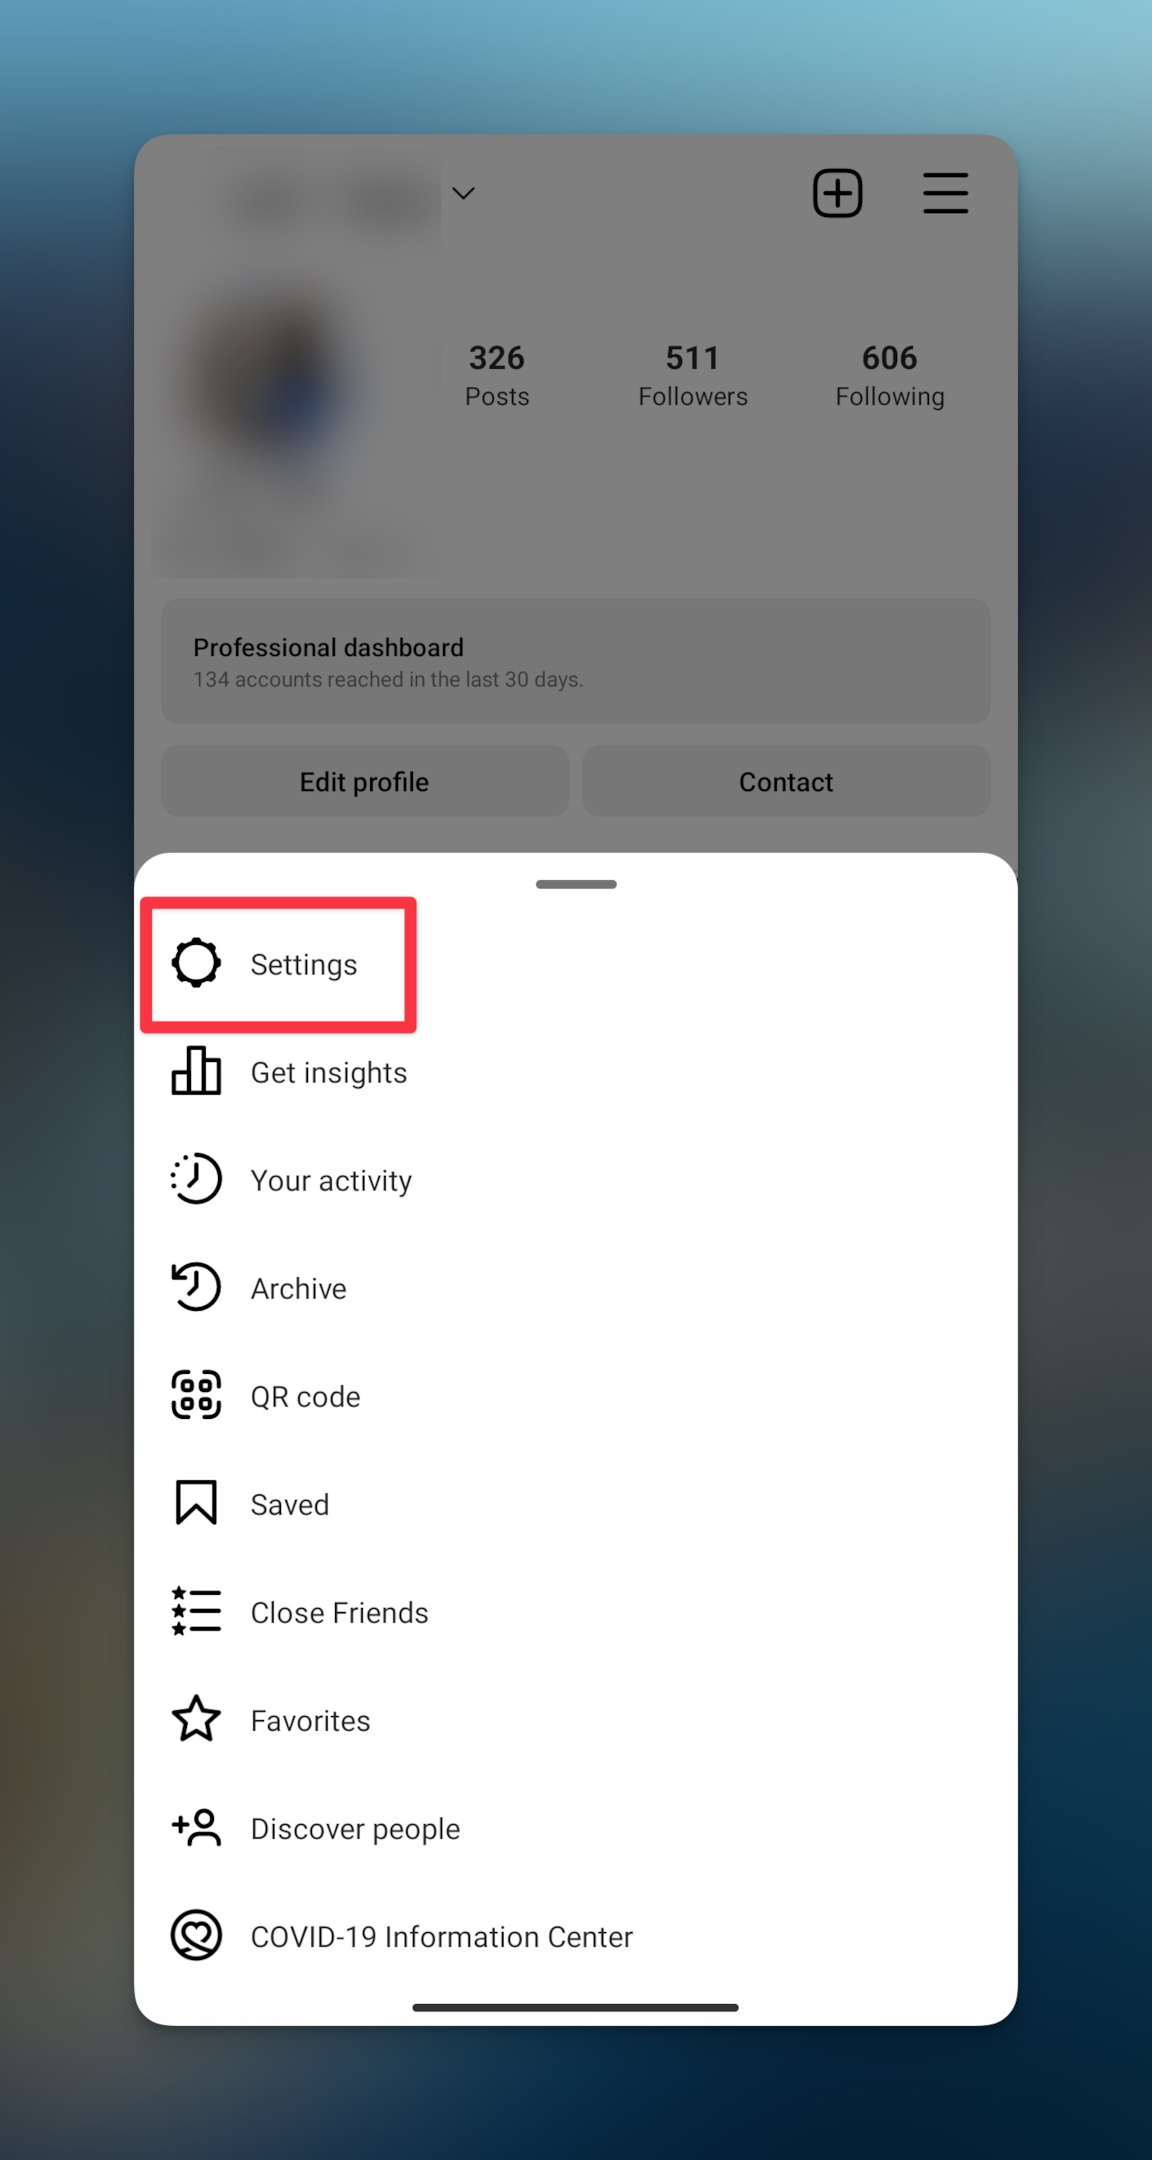 Remote.tools showing a screenshot of Instagram settings page to switch to private account